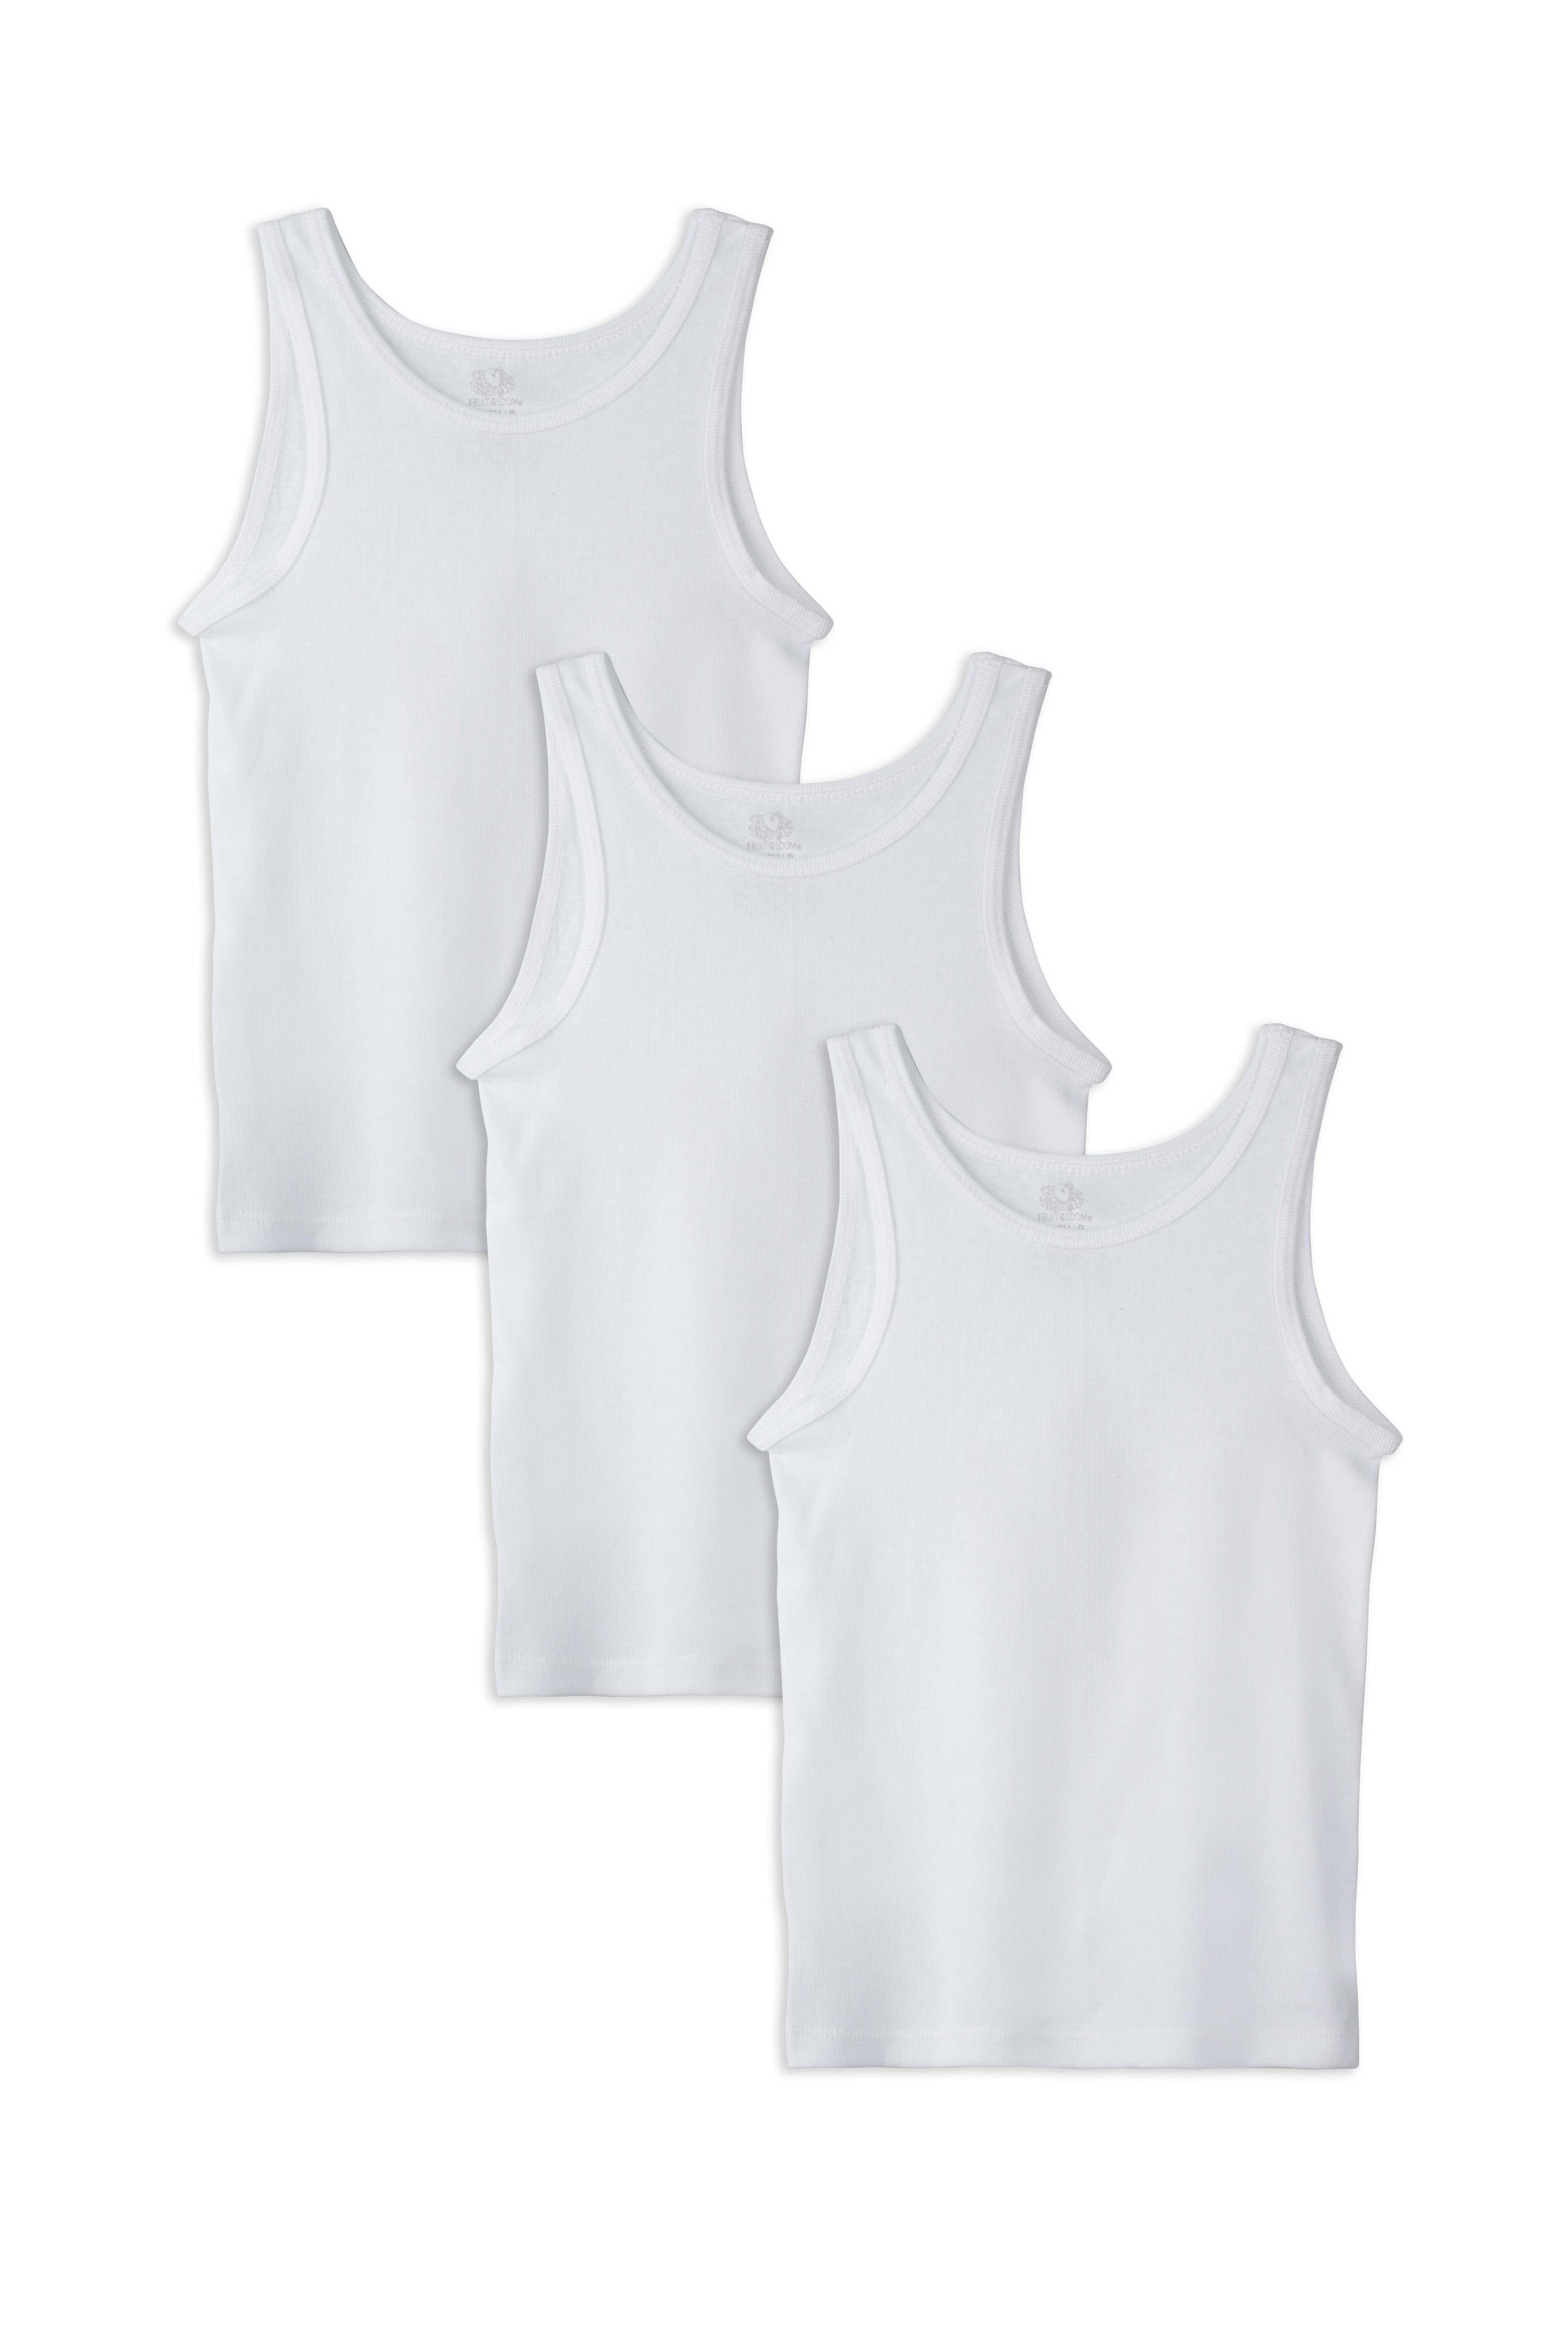 Fruit of the Loom Girls' Undershirts, Spin Cami Tank Tops, 10 Pack 